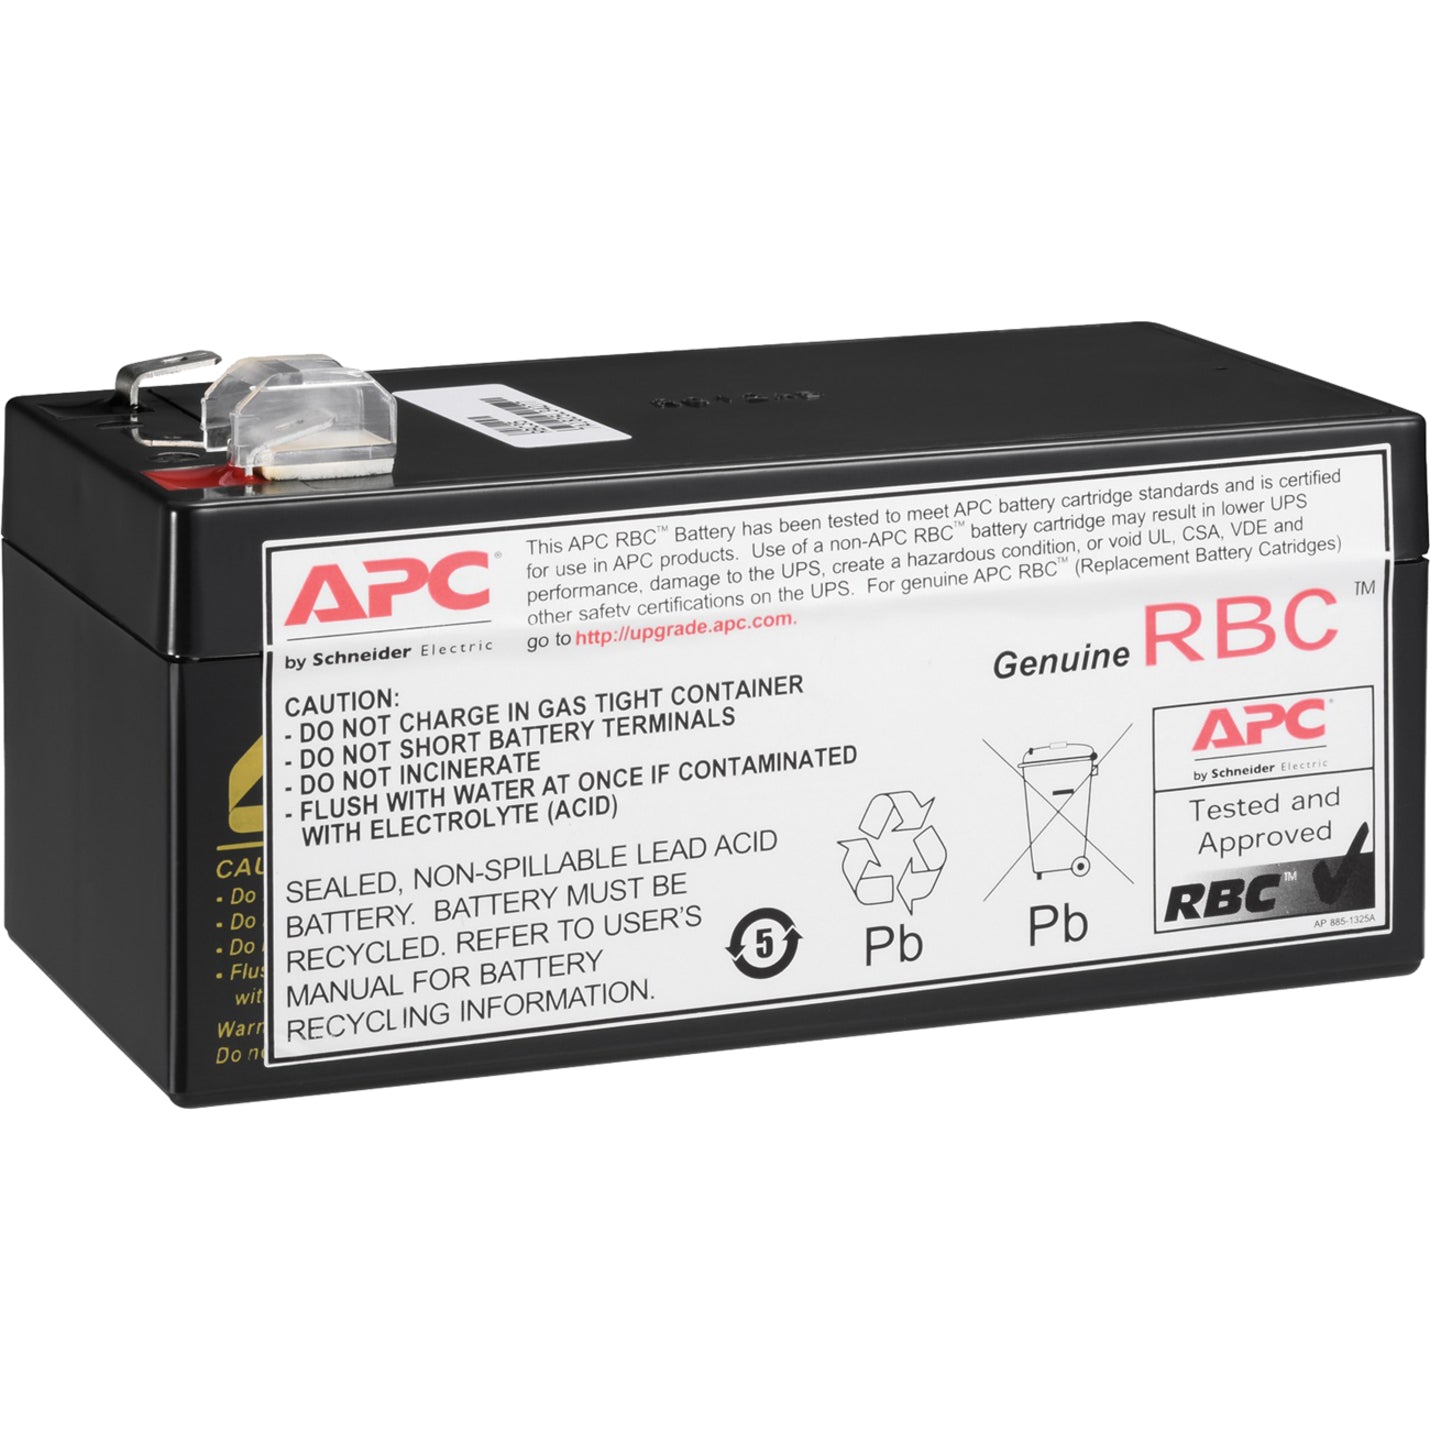 APC RBC35 Replacement Battery Cartridge #35, 2 Year Warranty, Hot Swappable, Lead Acid Battery, 5 Year Maximum Battery Life